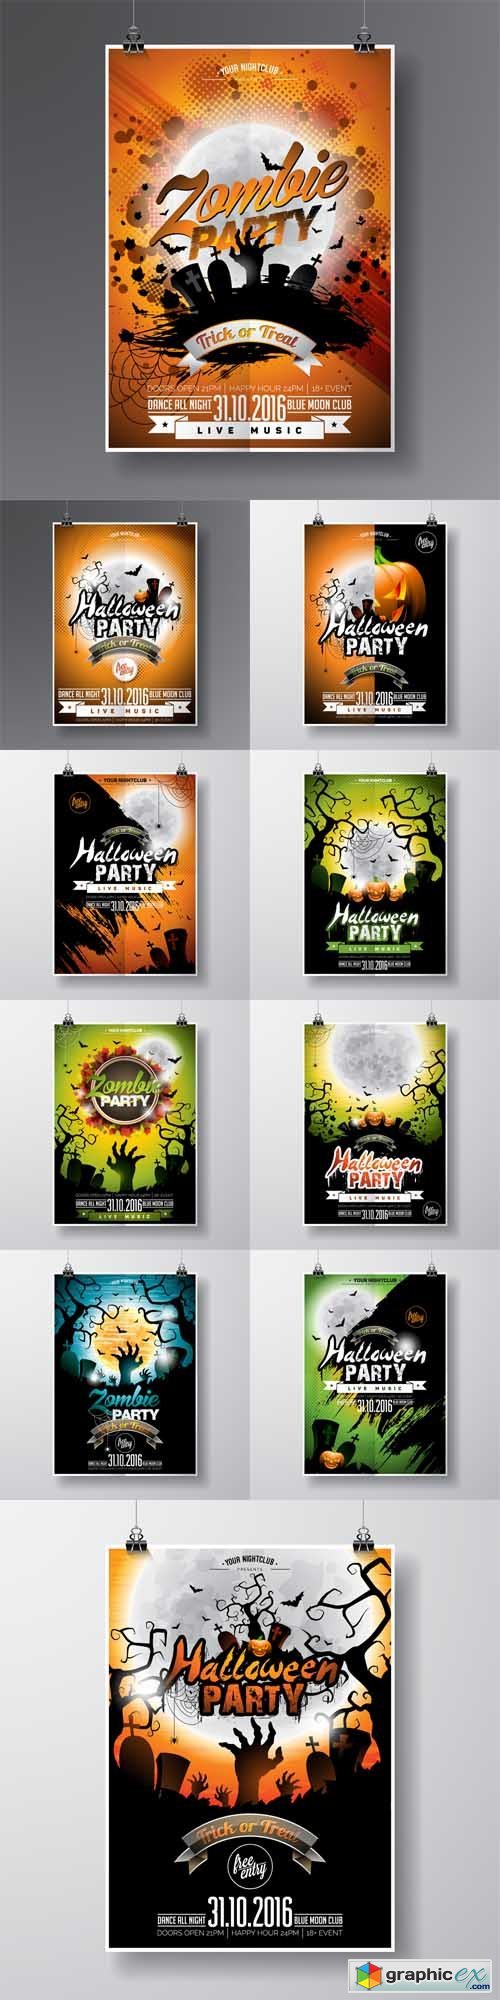 Halloween Party Flyer Design with Typographic Elements and Pumpkin